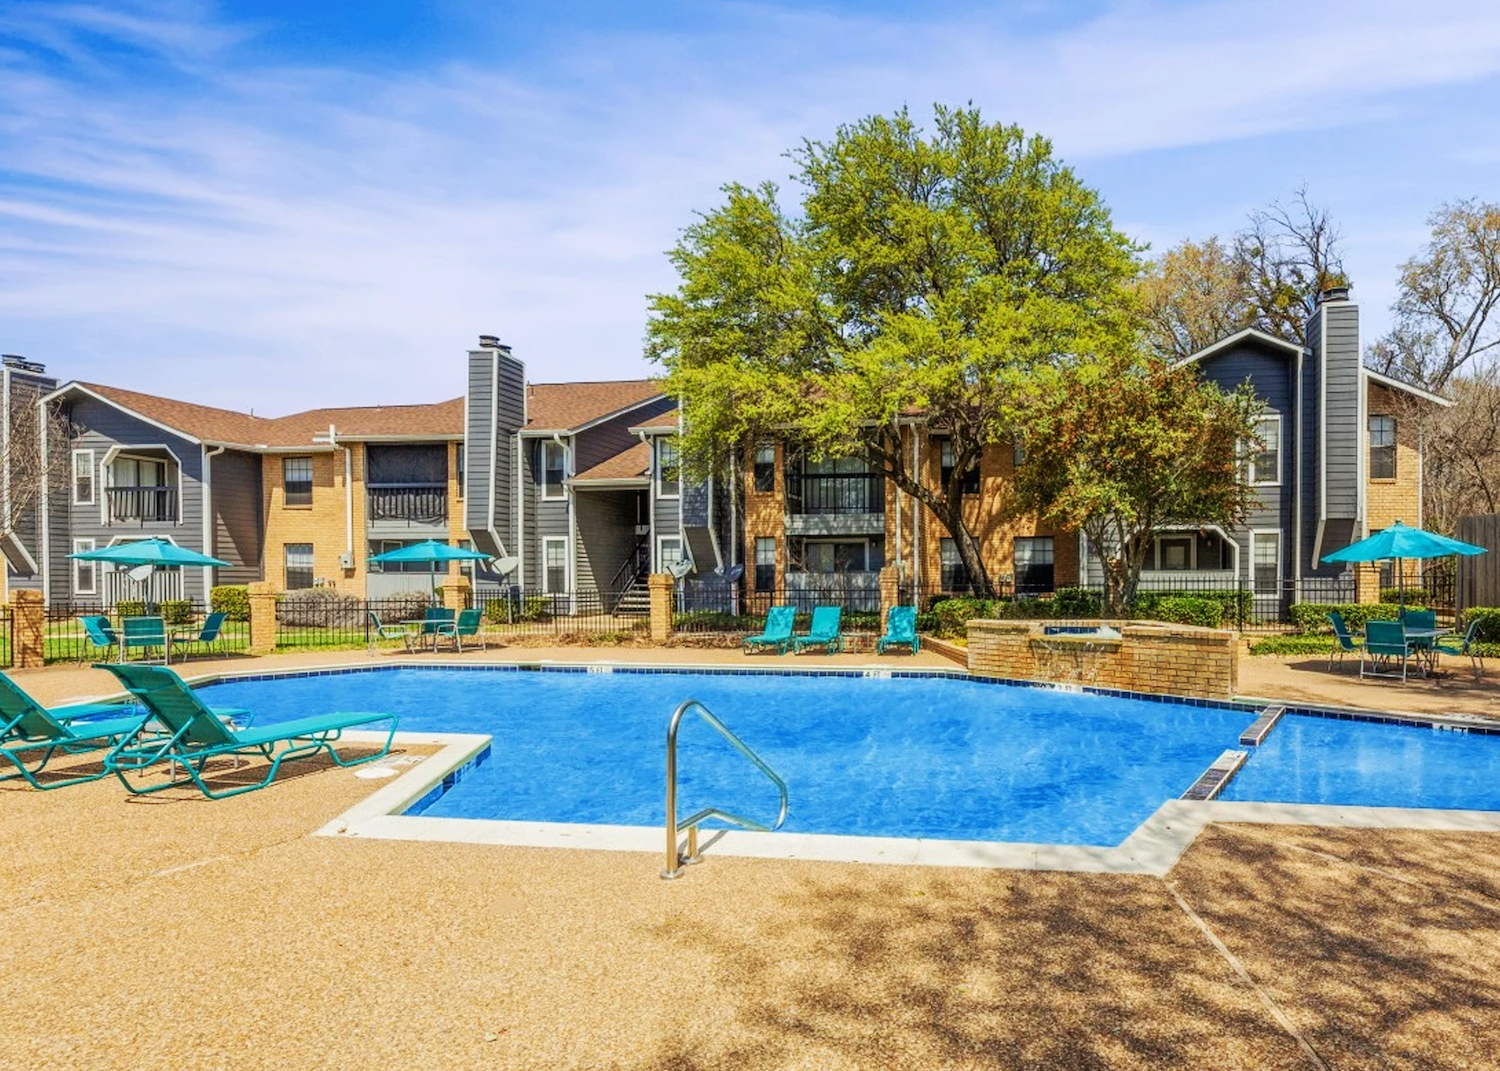 Cove Capital Buys Value-Add Multifamily Community Near Dallas for